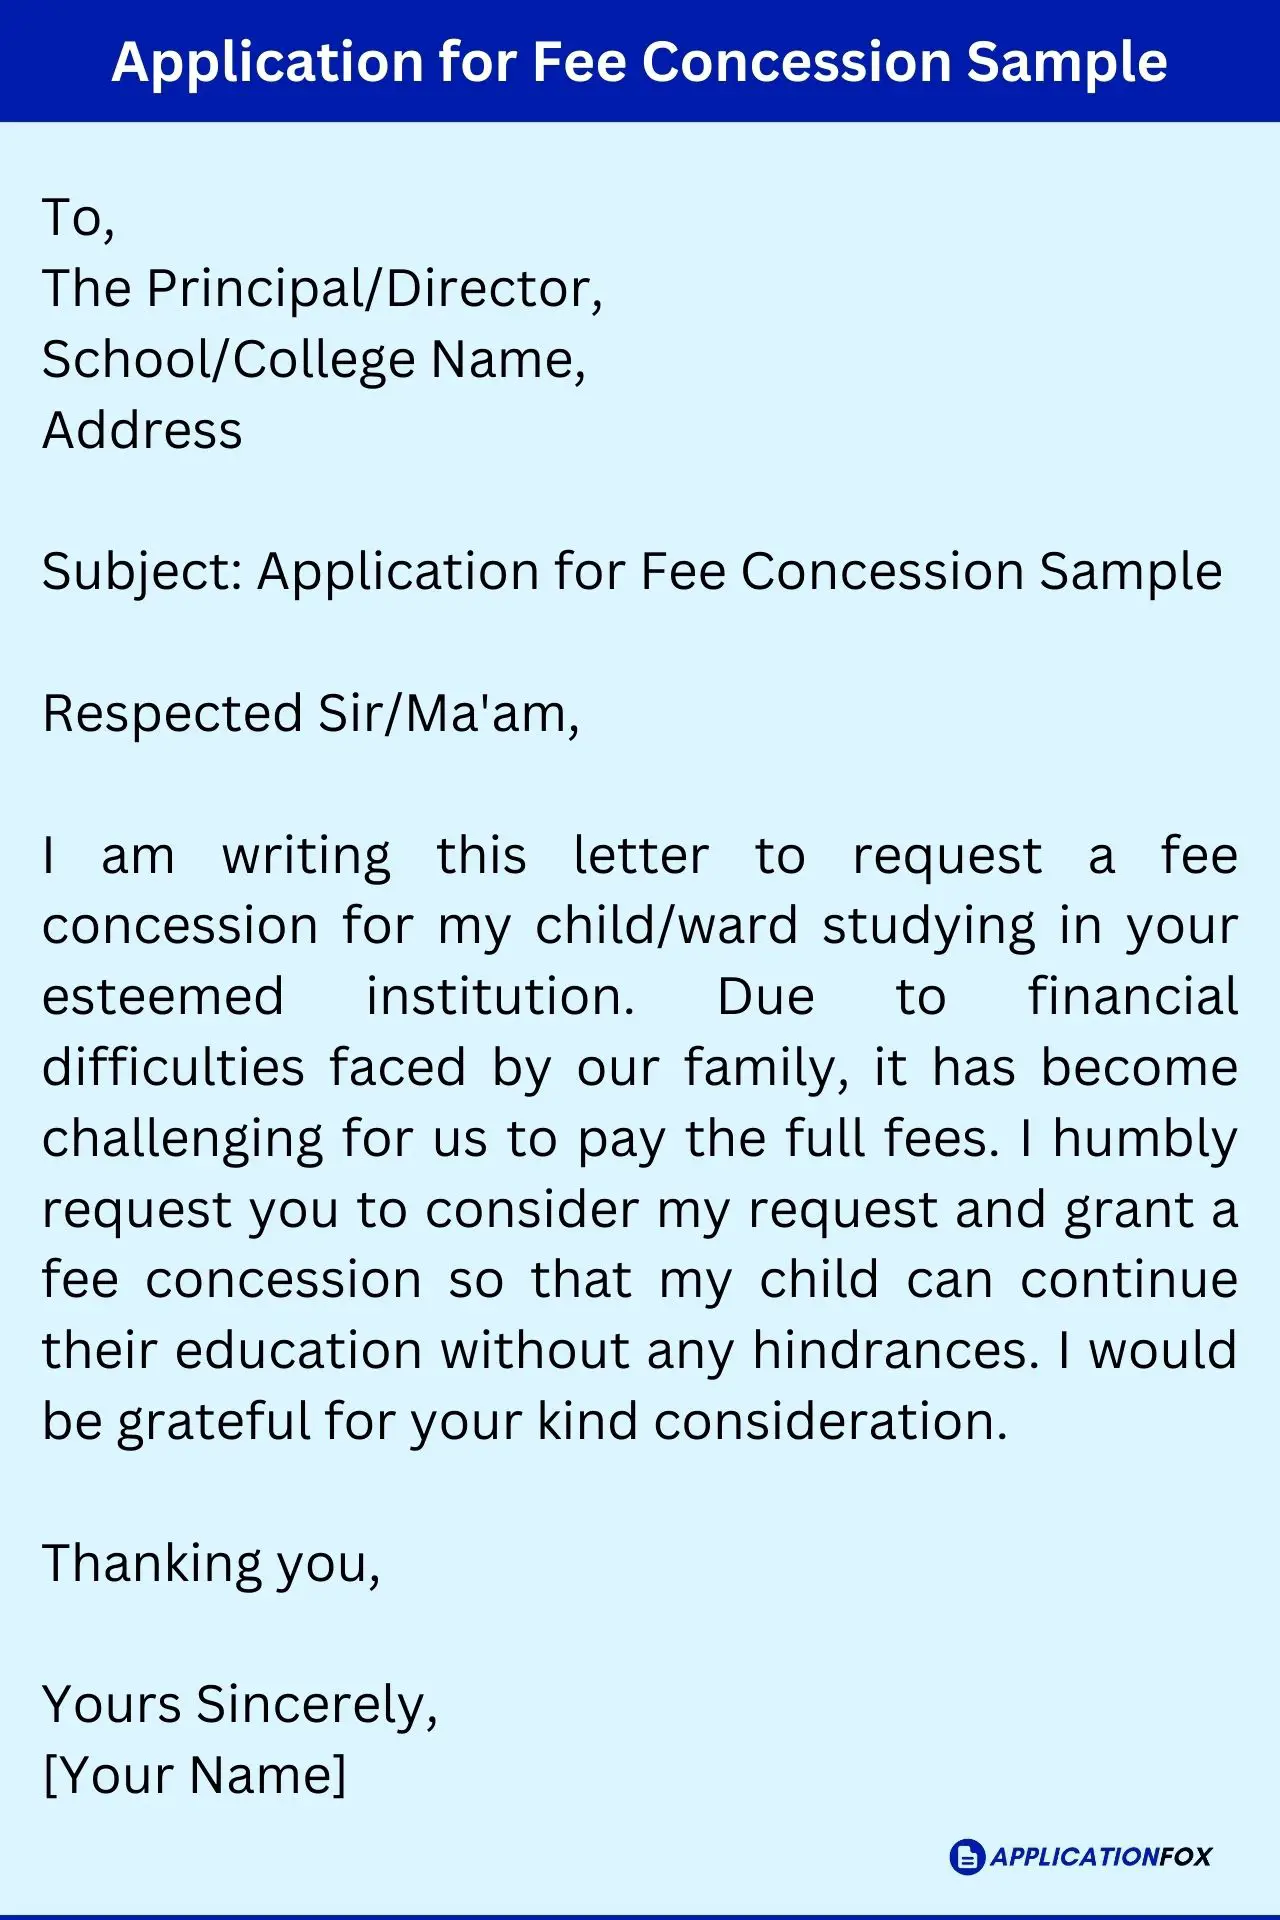 Application for Fee Concession Sample